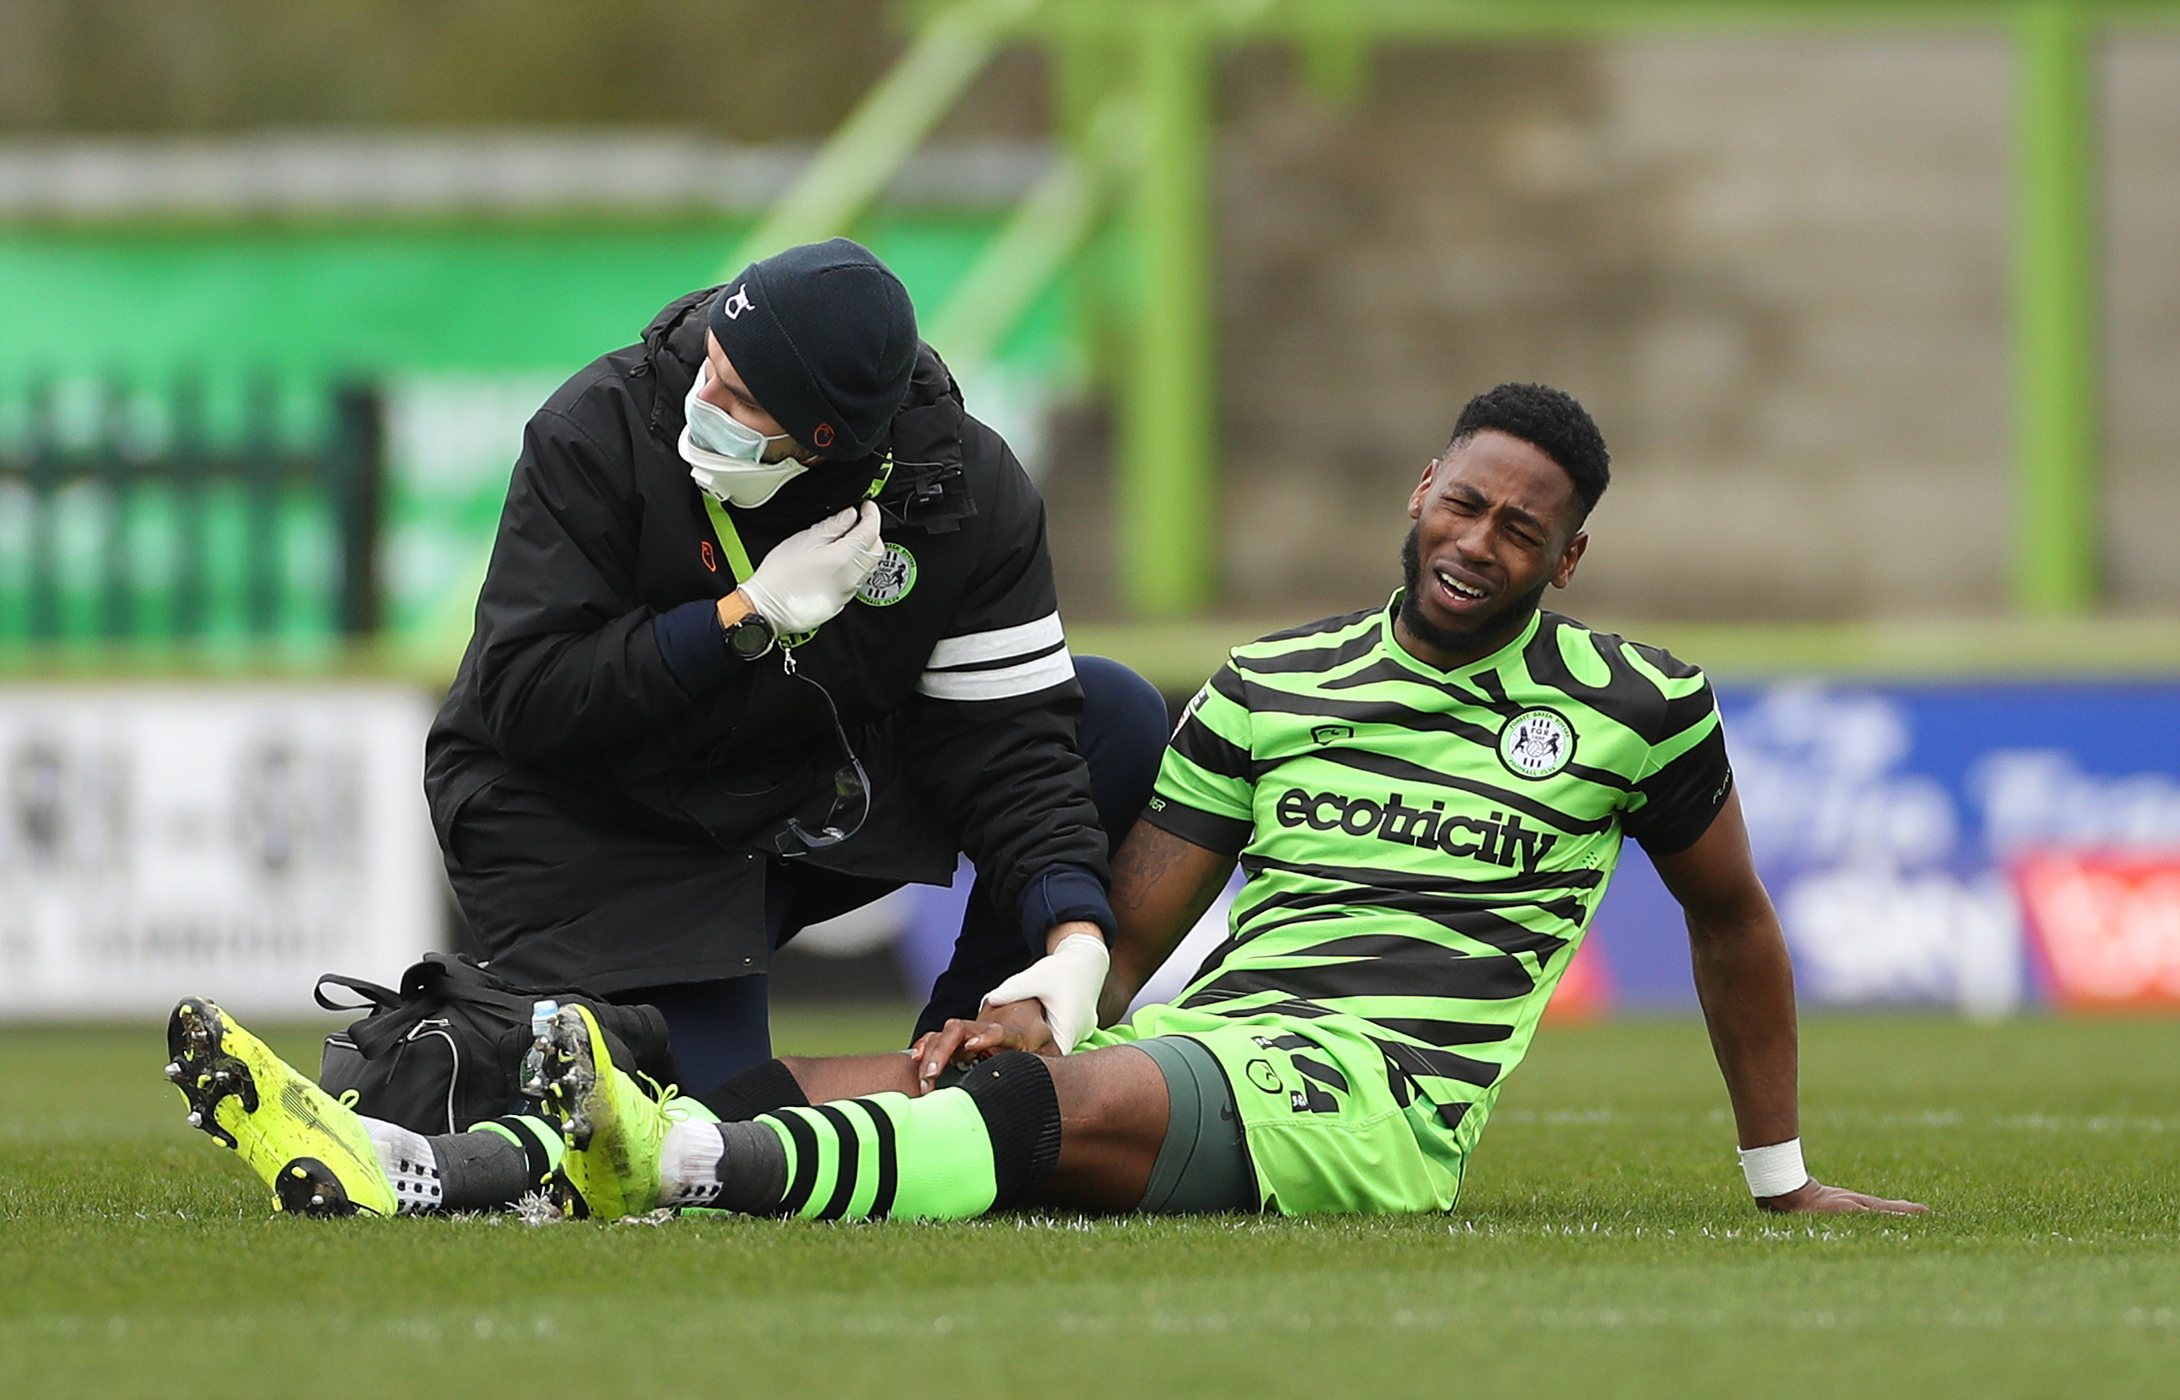 AGONY: Forest Green Rovers Jamille Matt looks on pain after his hand injury against Bolton